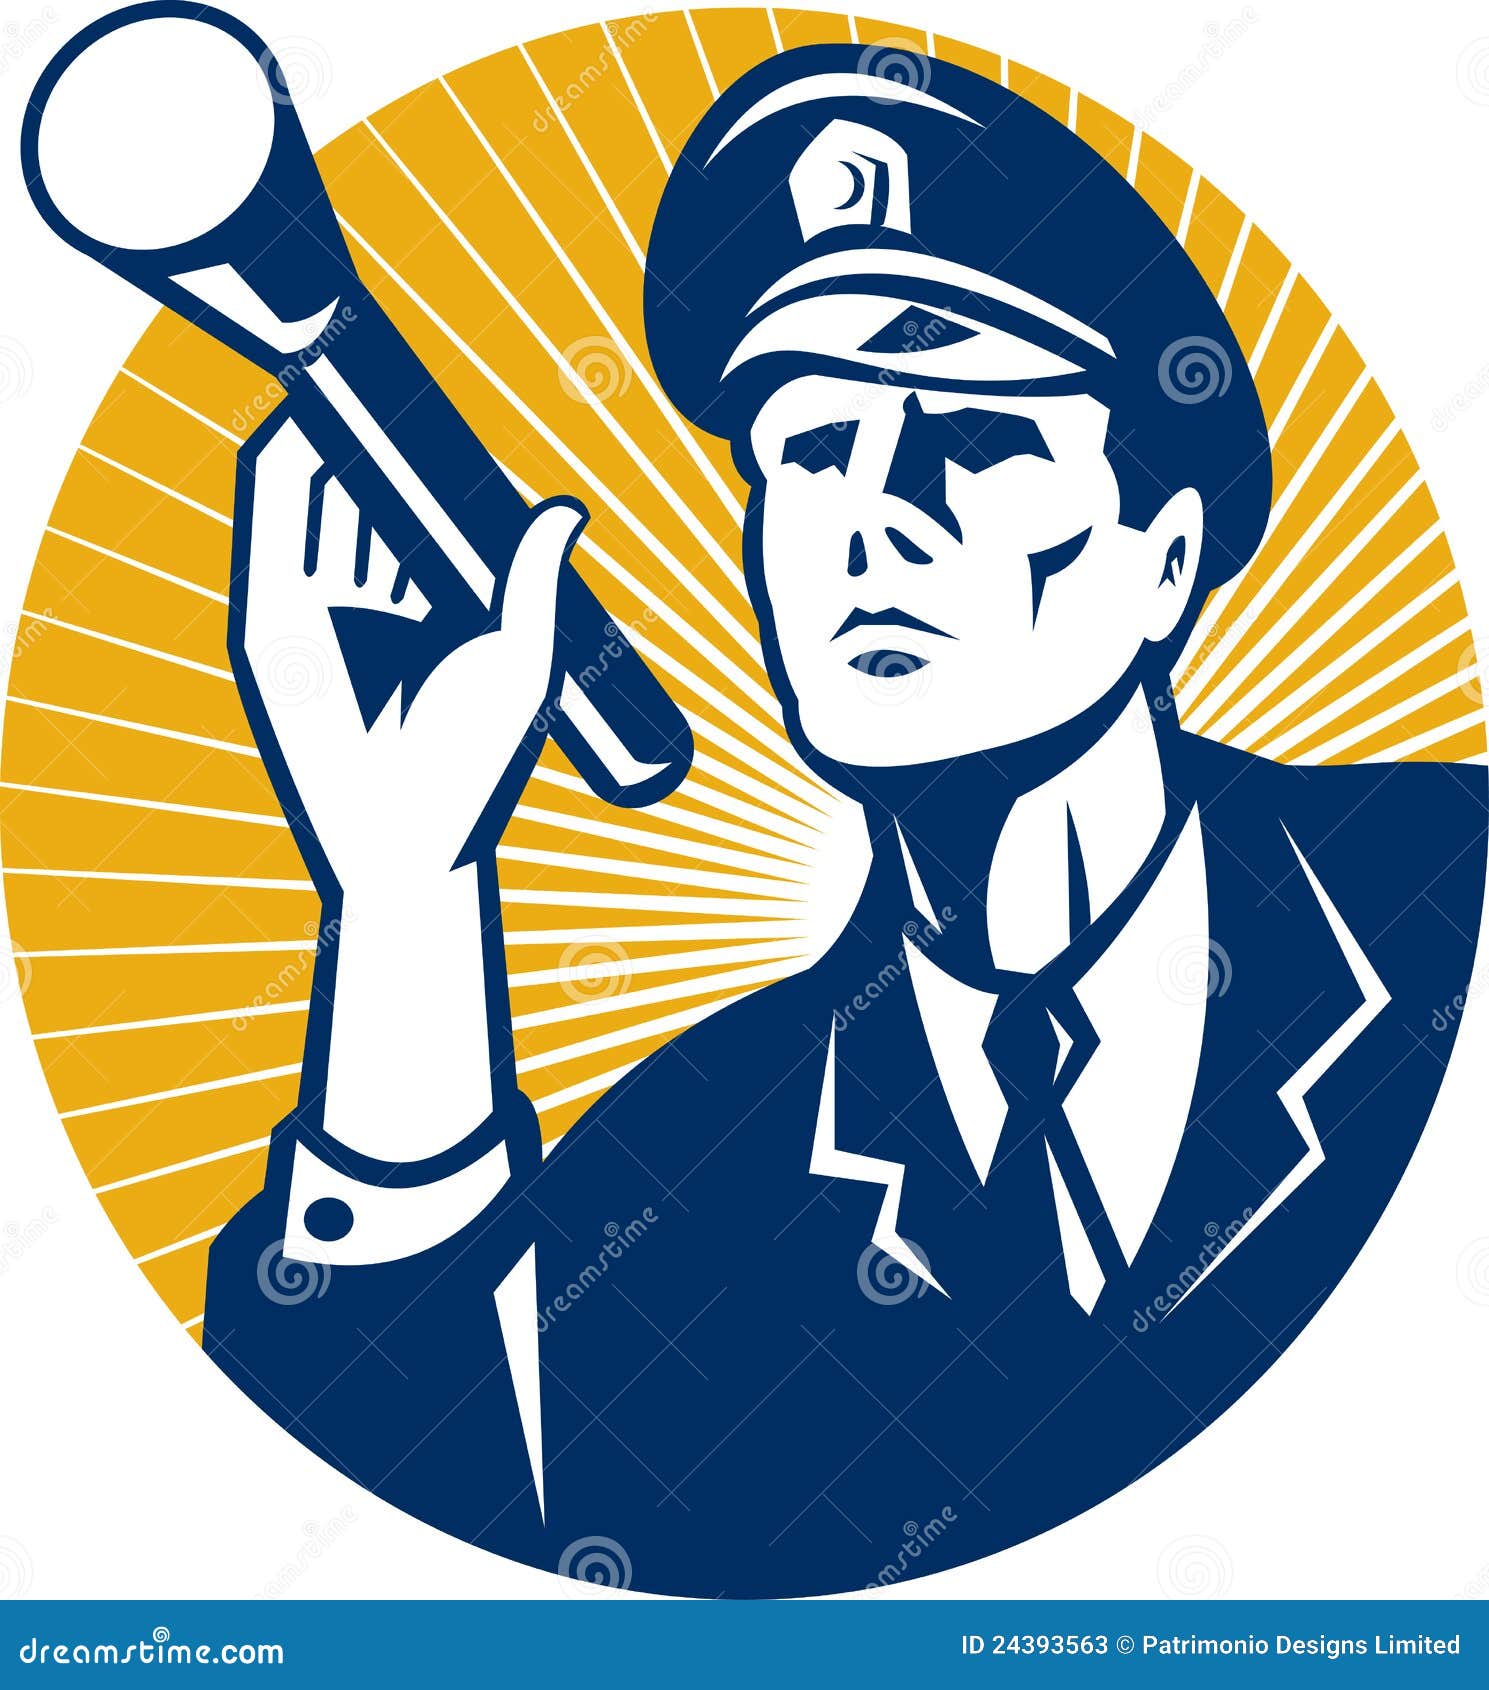 security officer clipart - photo #14